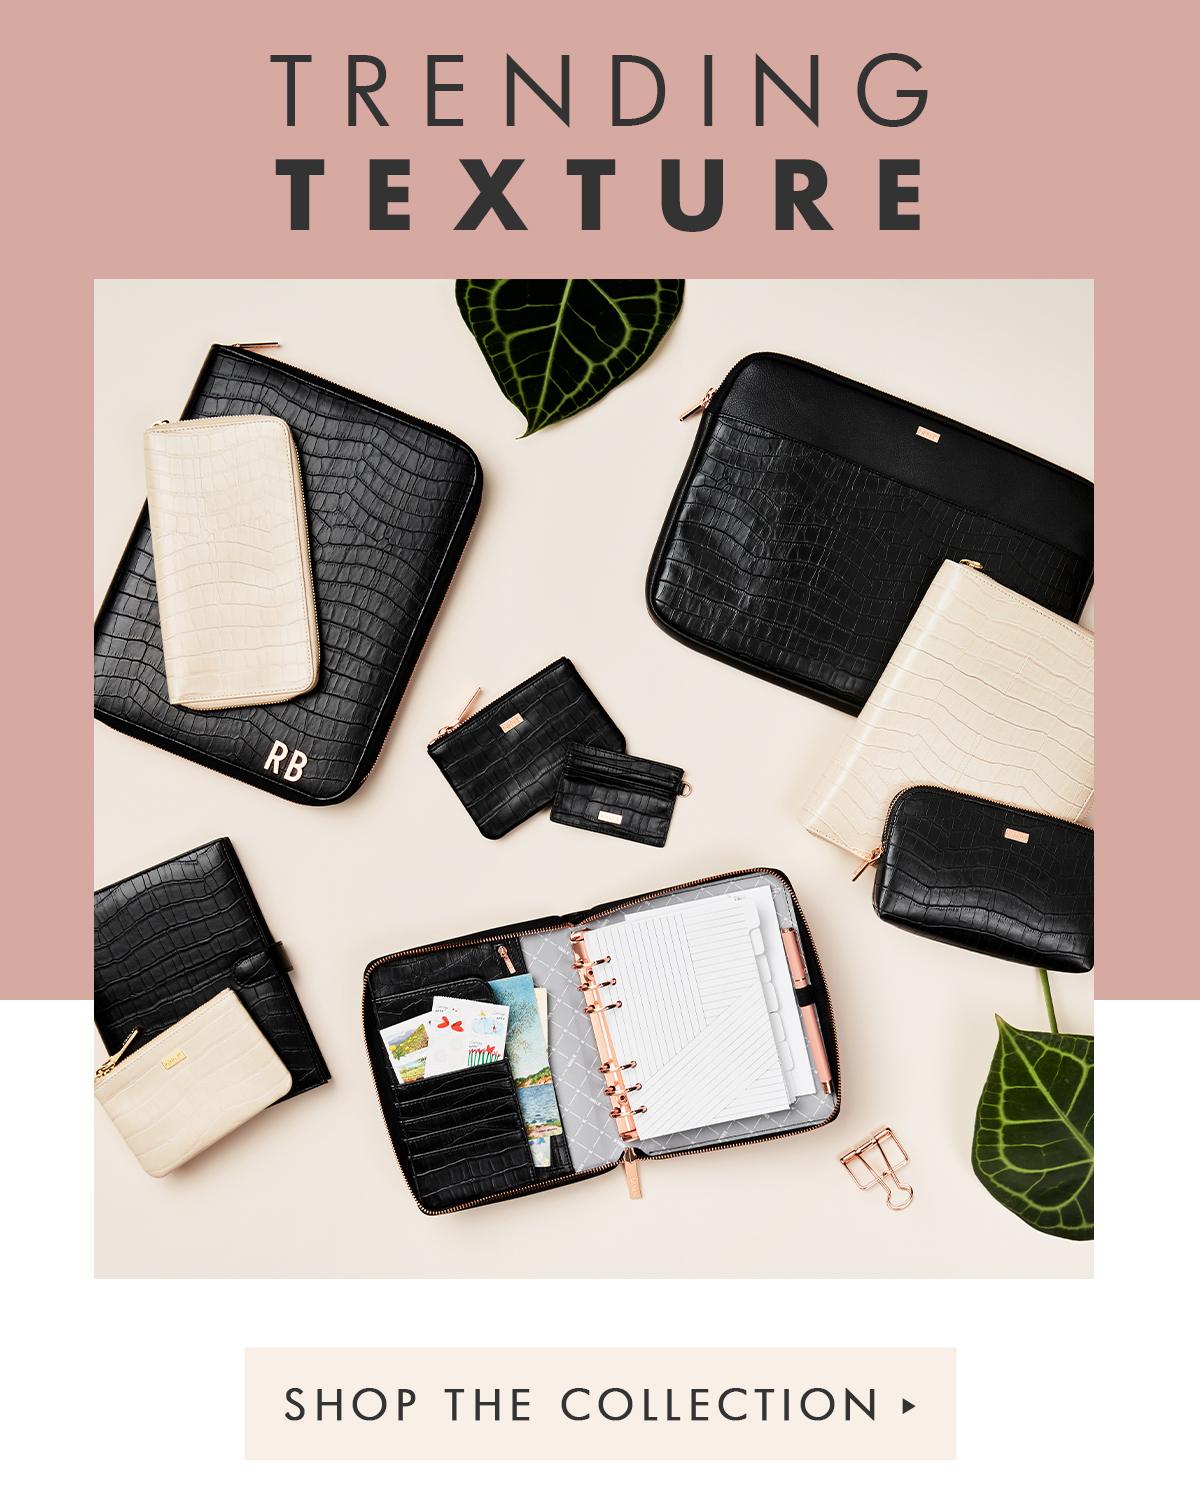 Trending Texture. Shop the collection.